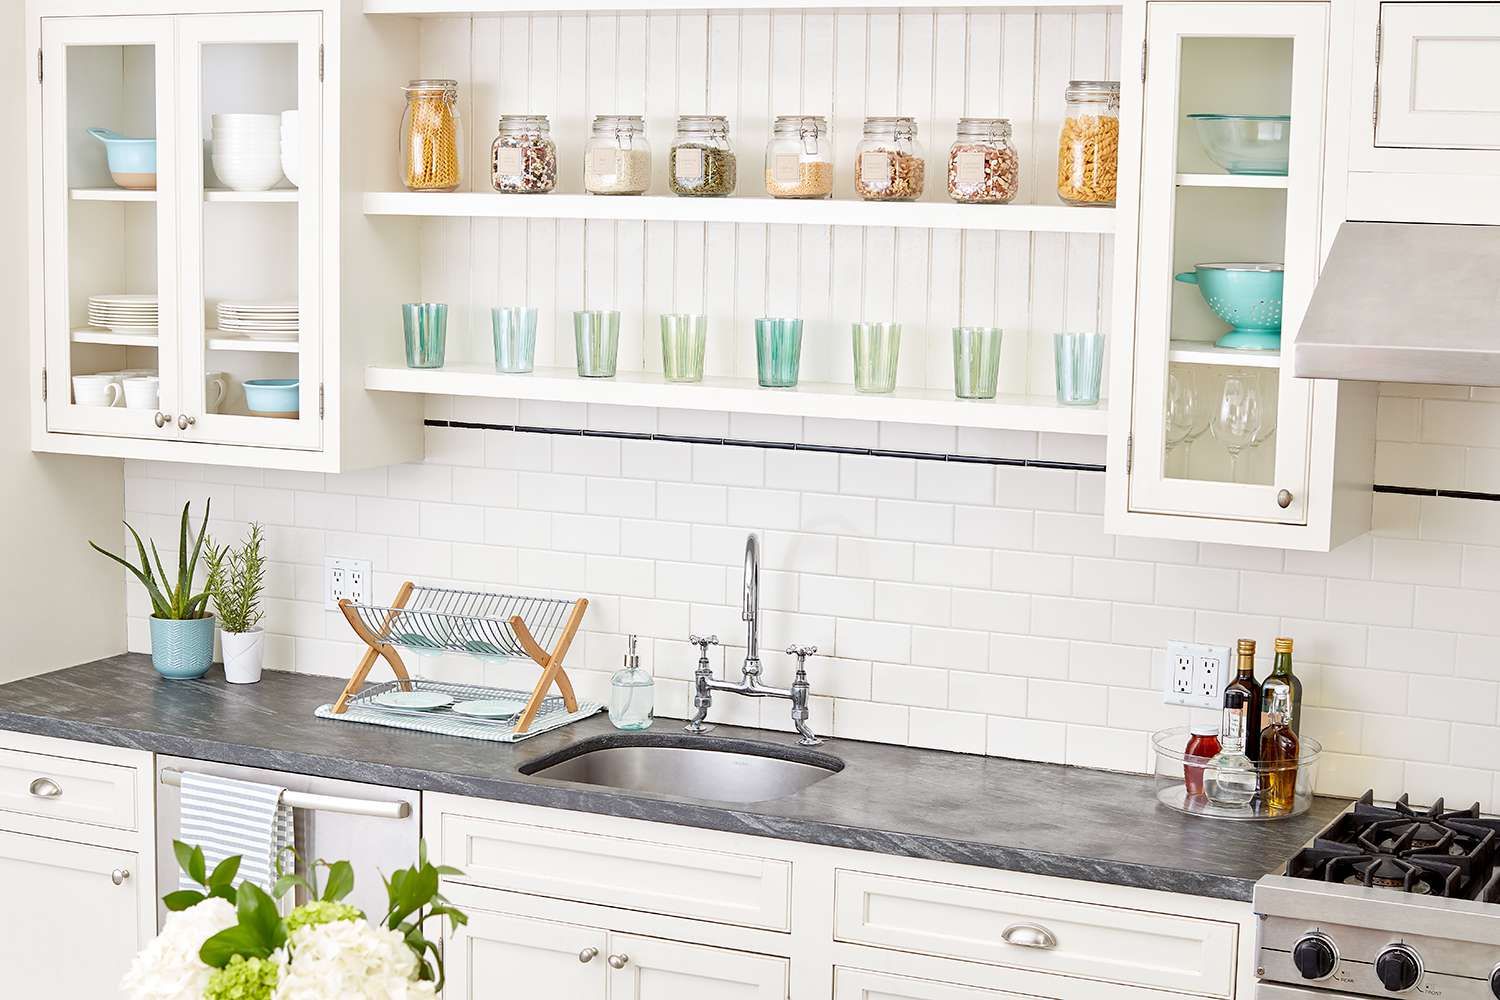 How To Store Glassware In Cabinets